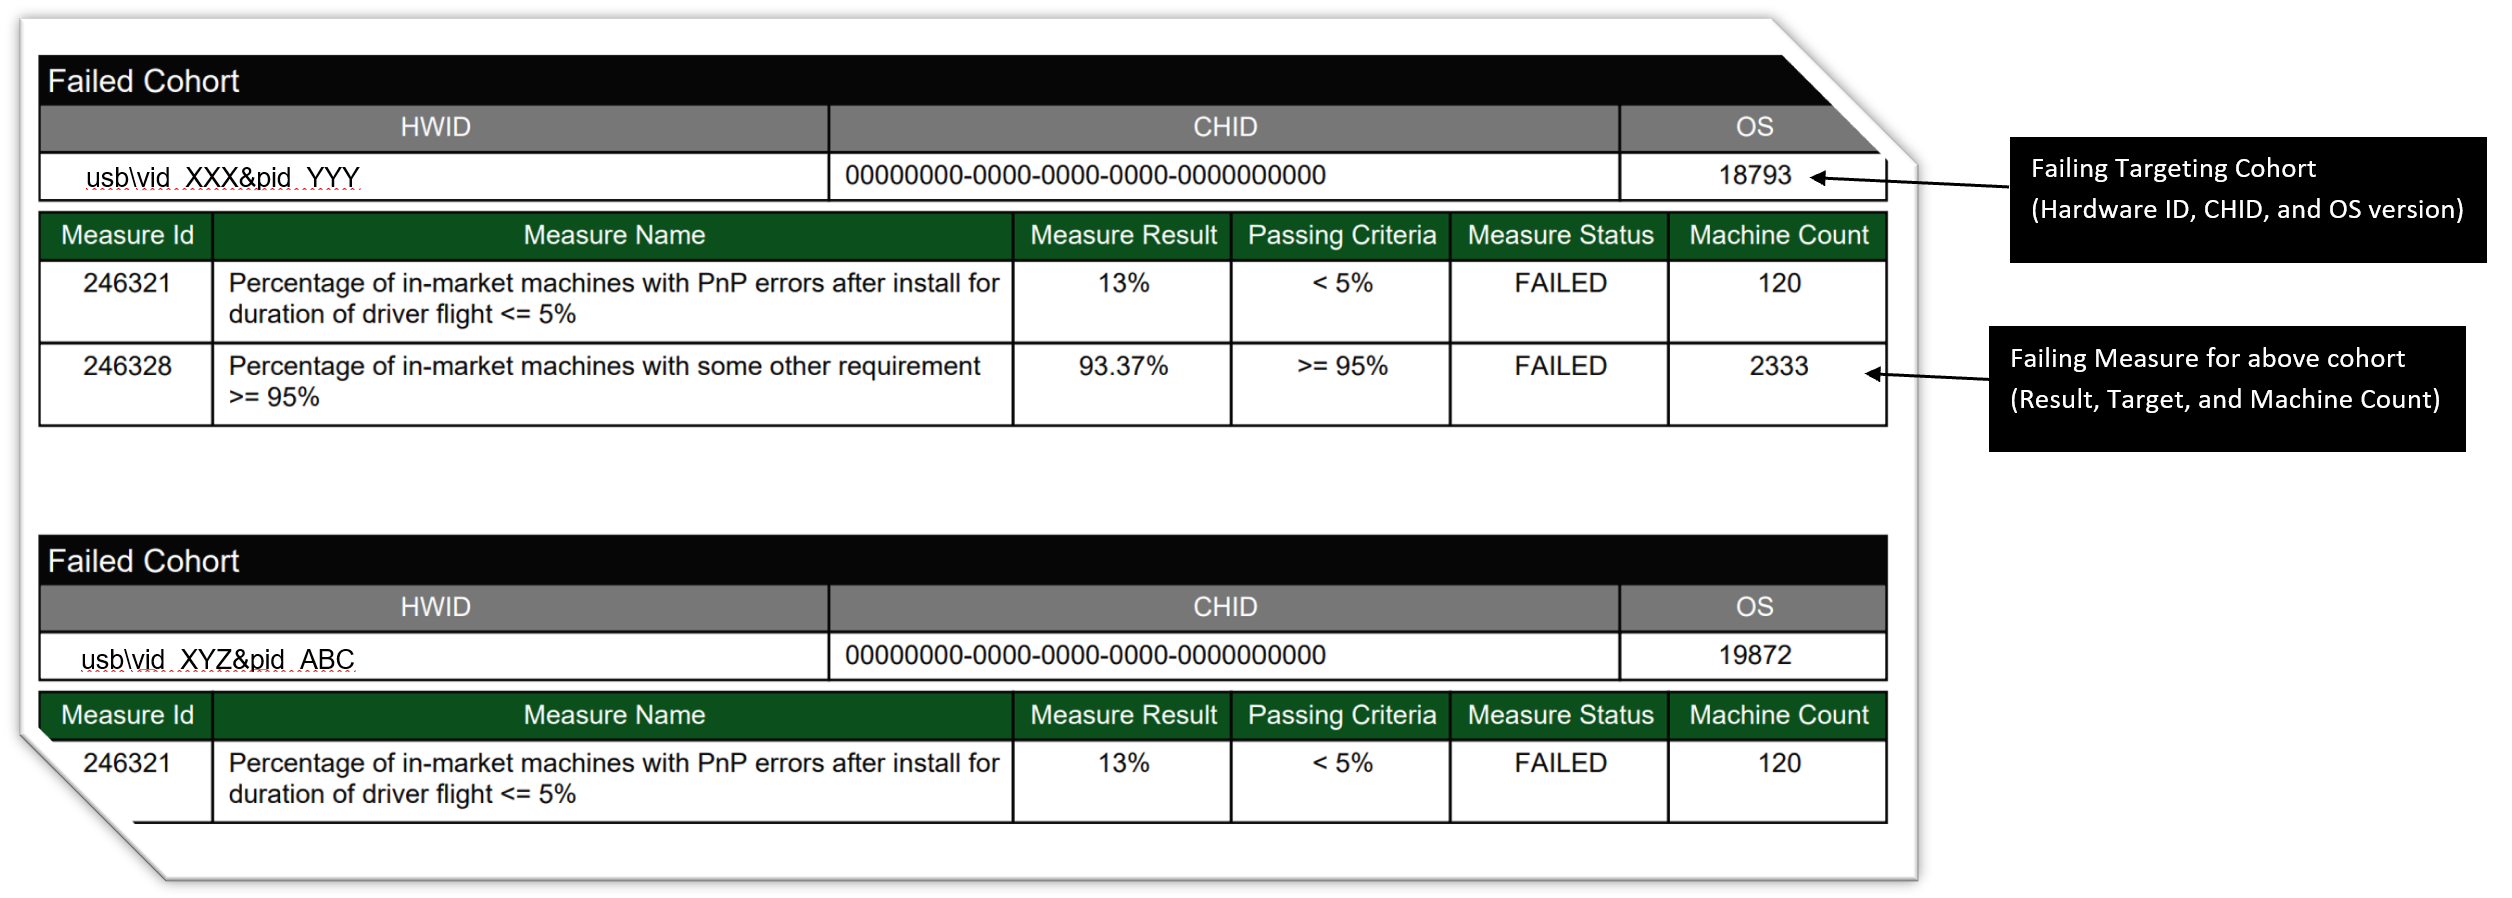 Screenshot of the Details section that includes each failing targeting cohort and the failing measure details for each cohort.